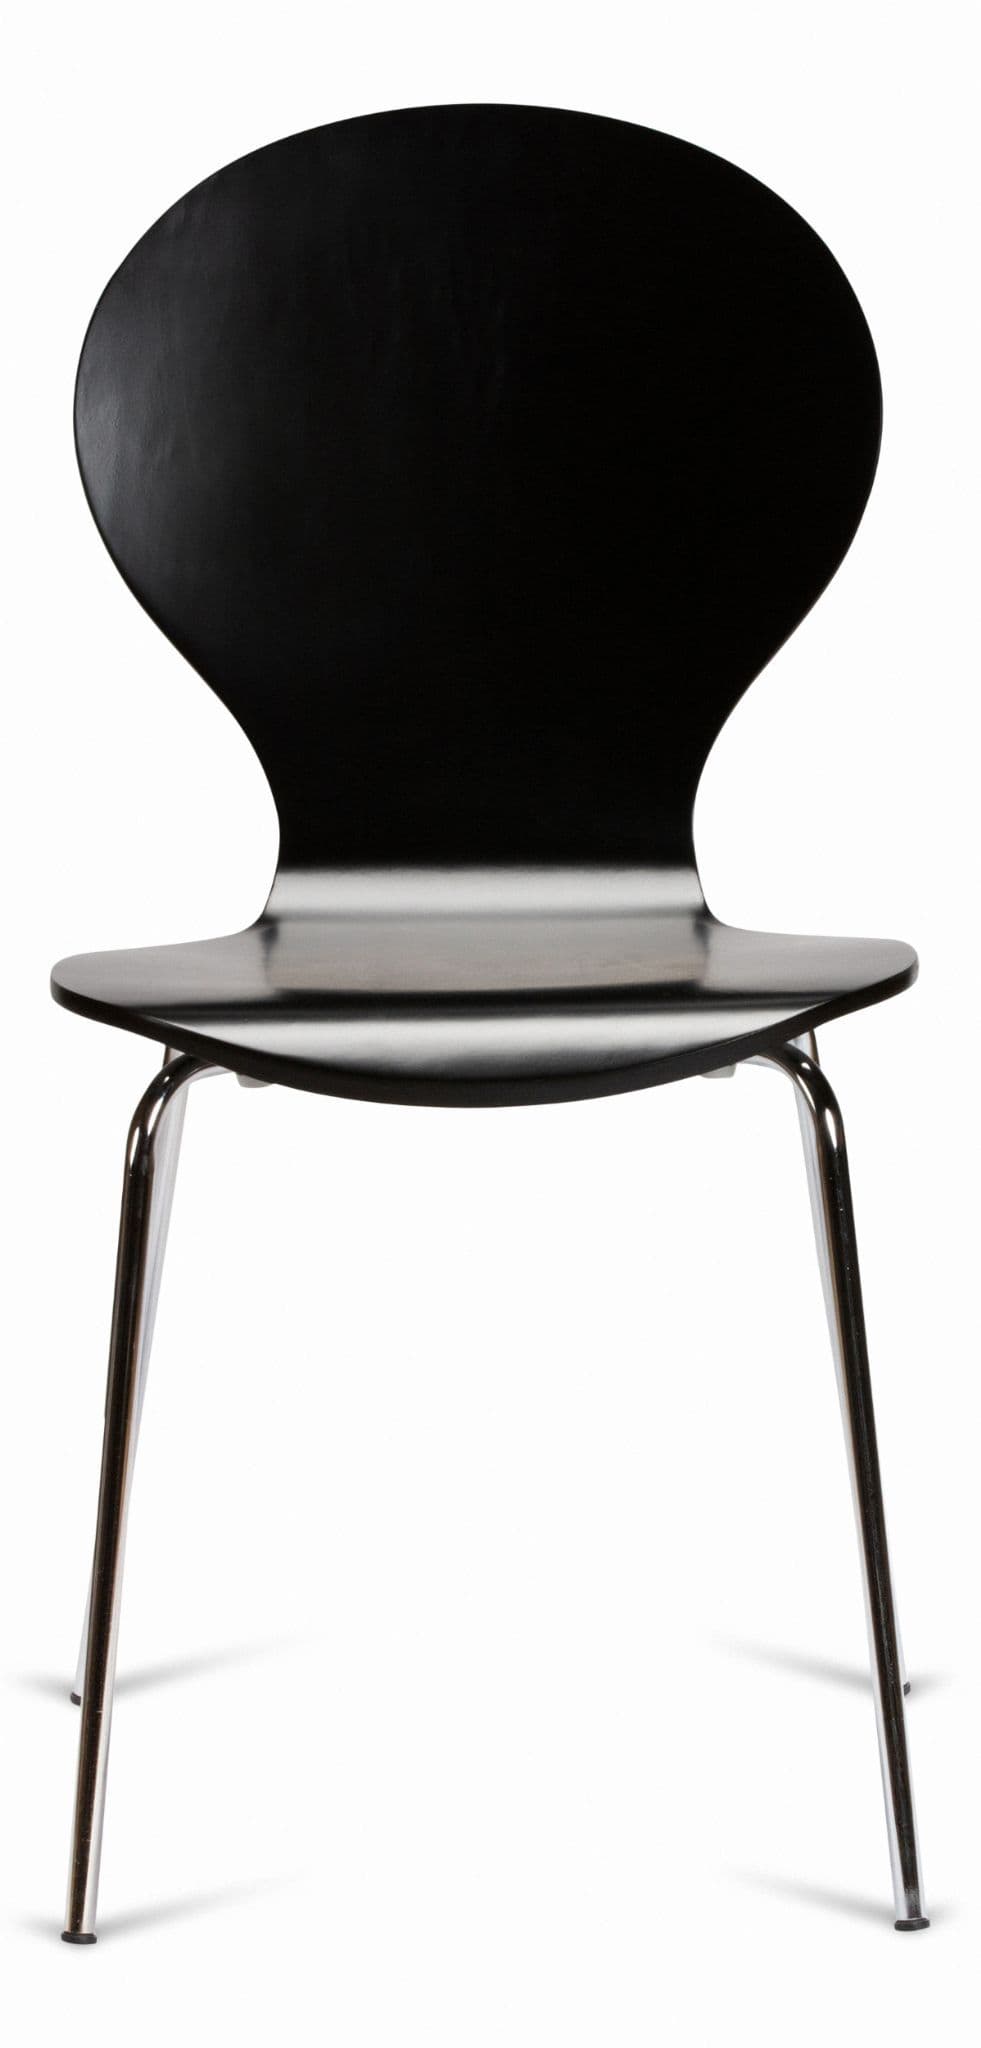 Kimberley Black & Chrome Dining Chairs Front View